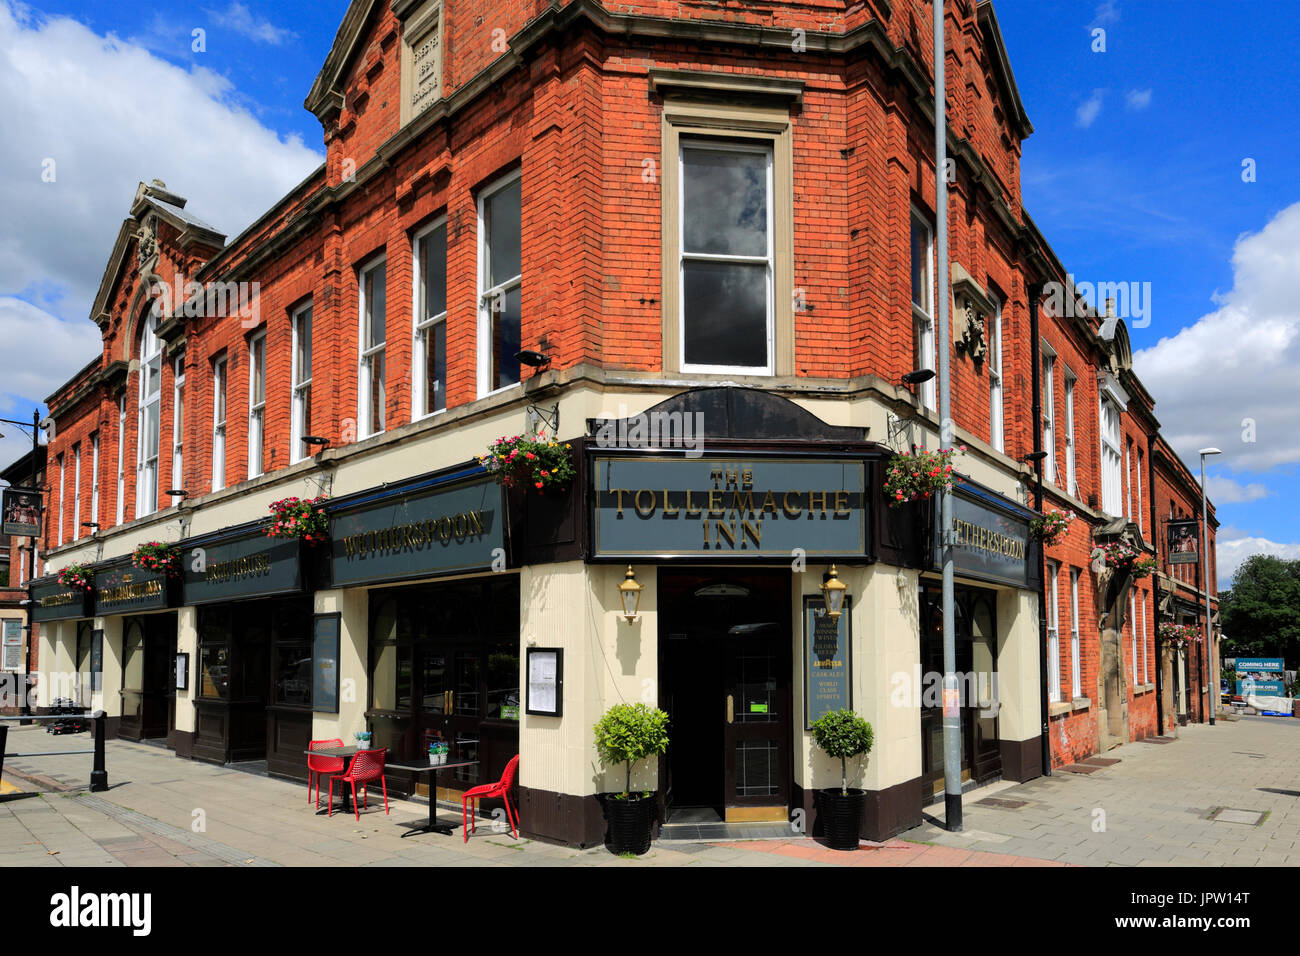 The Tollemache Inn pub, St Peters Hill, Grantham town, Lincolnshire, England, UK Stock Photo